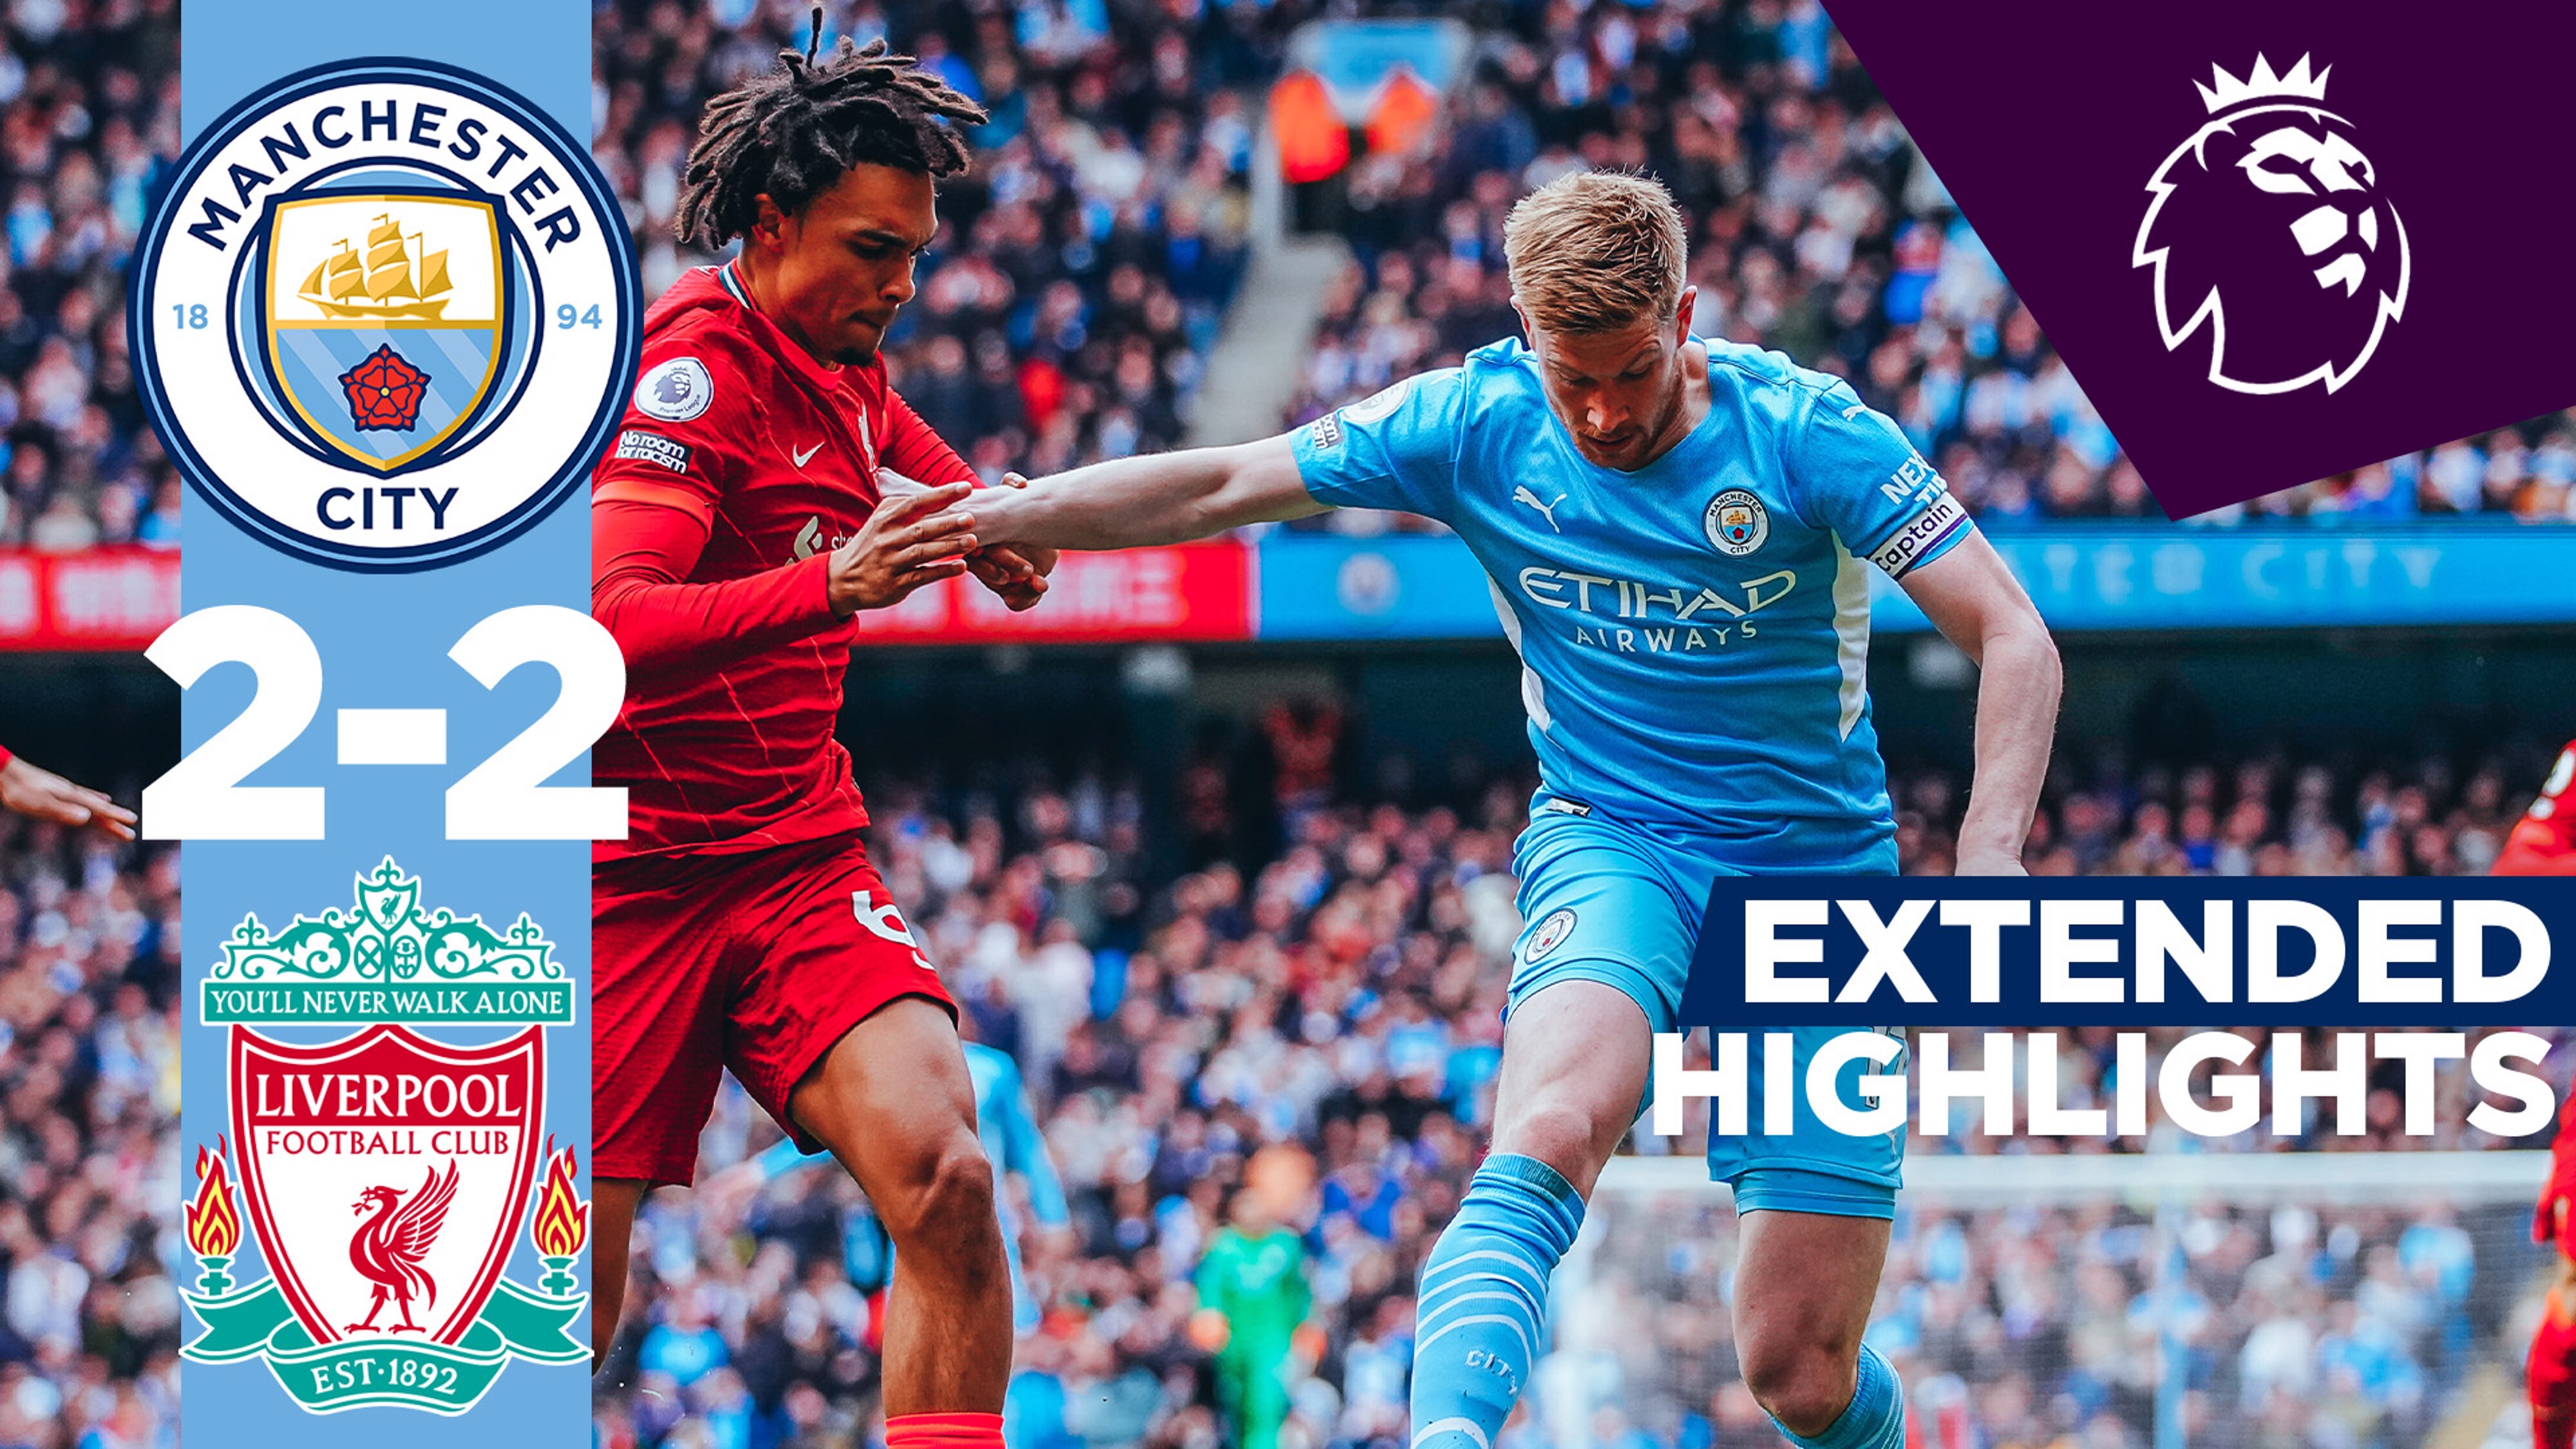 City 2-2 Liverpool Extended highlights